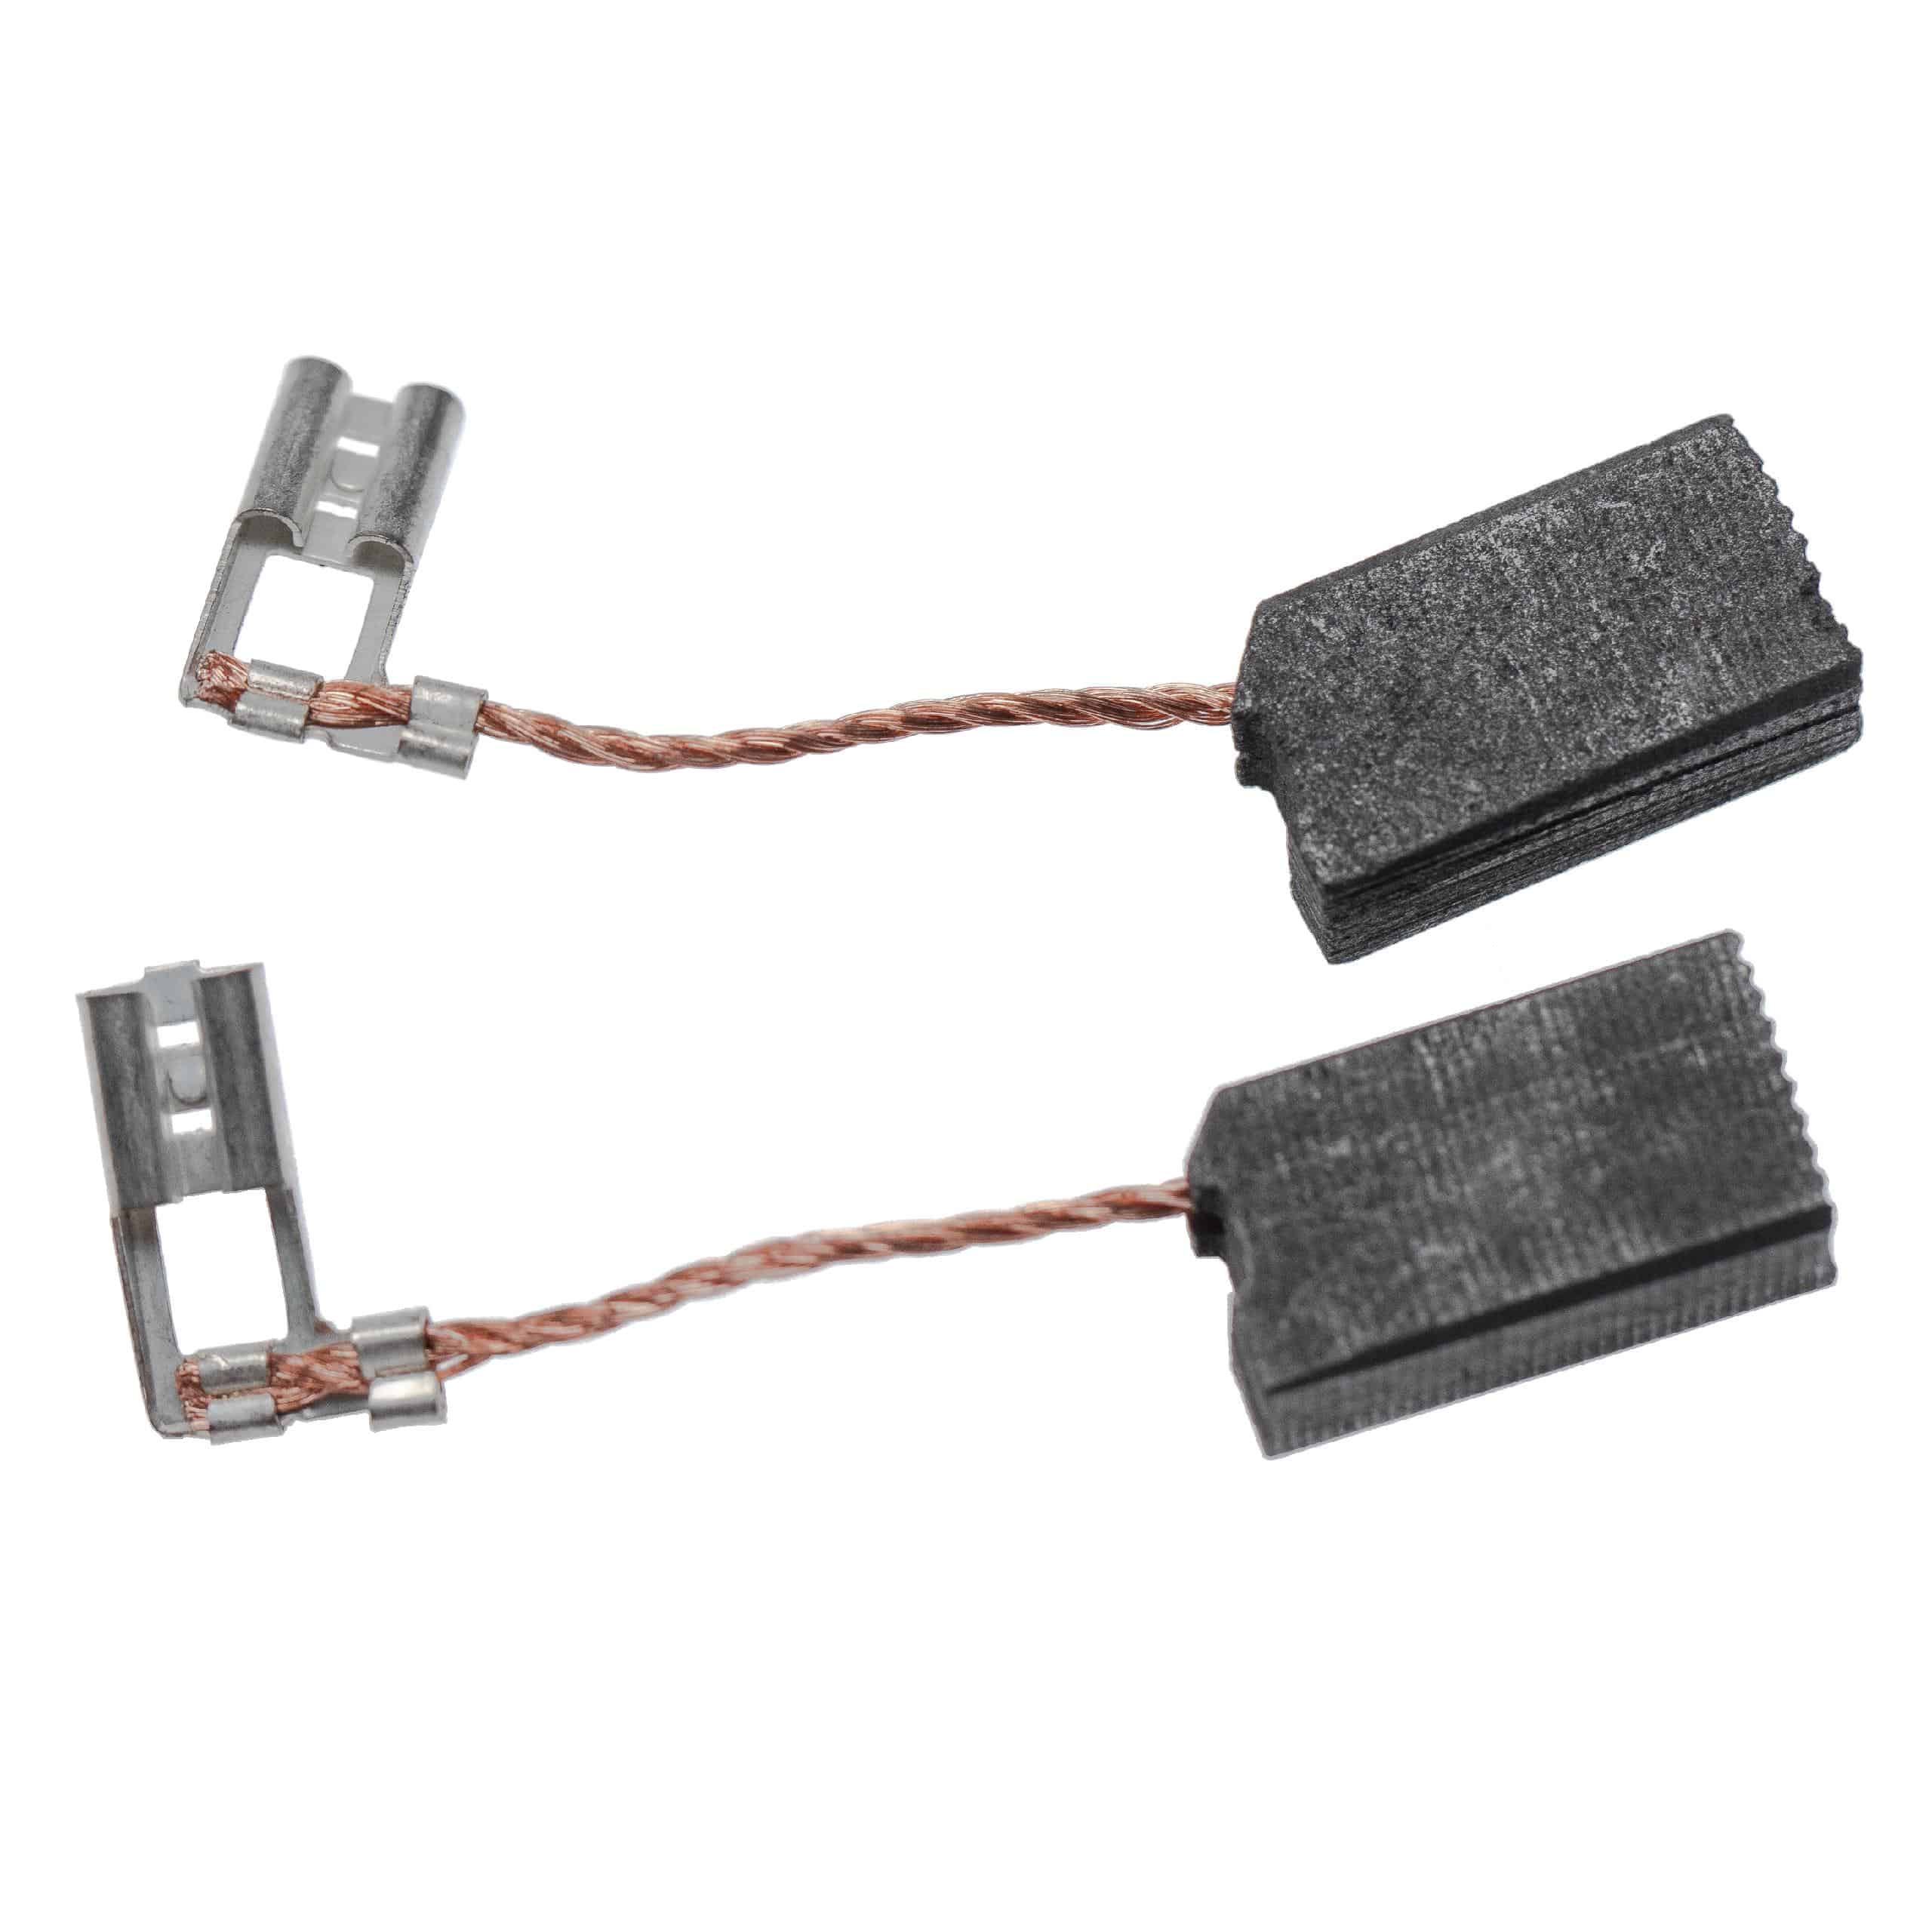 2x Carbon Brush as Replacement for Hilti 76594 Electric Power Tools + Angled Connector, 6 x 10 x 18mm